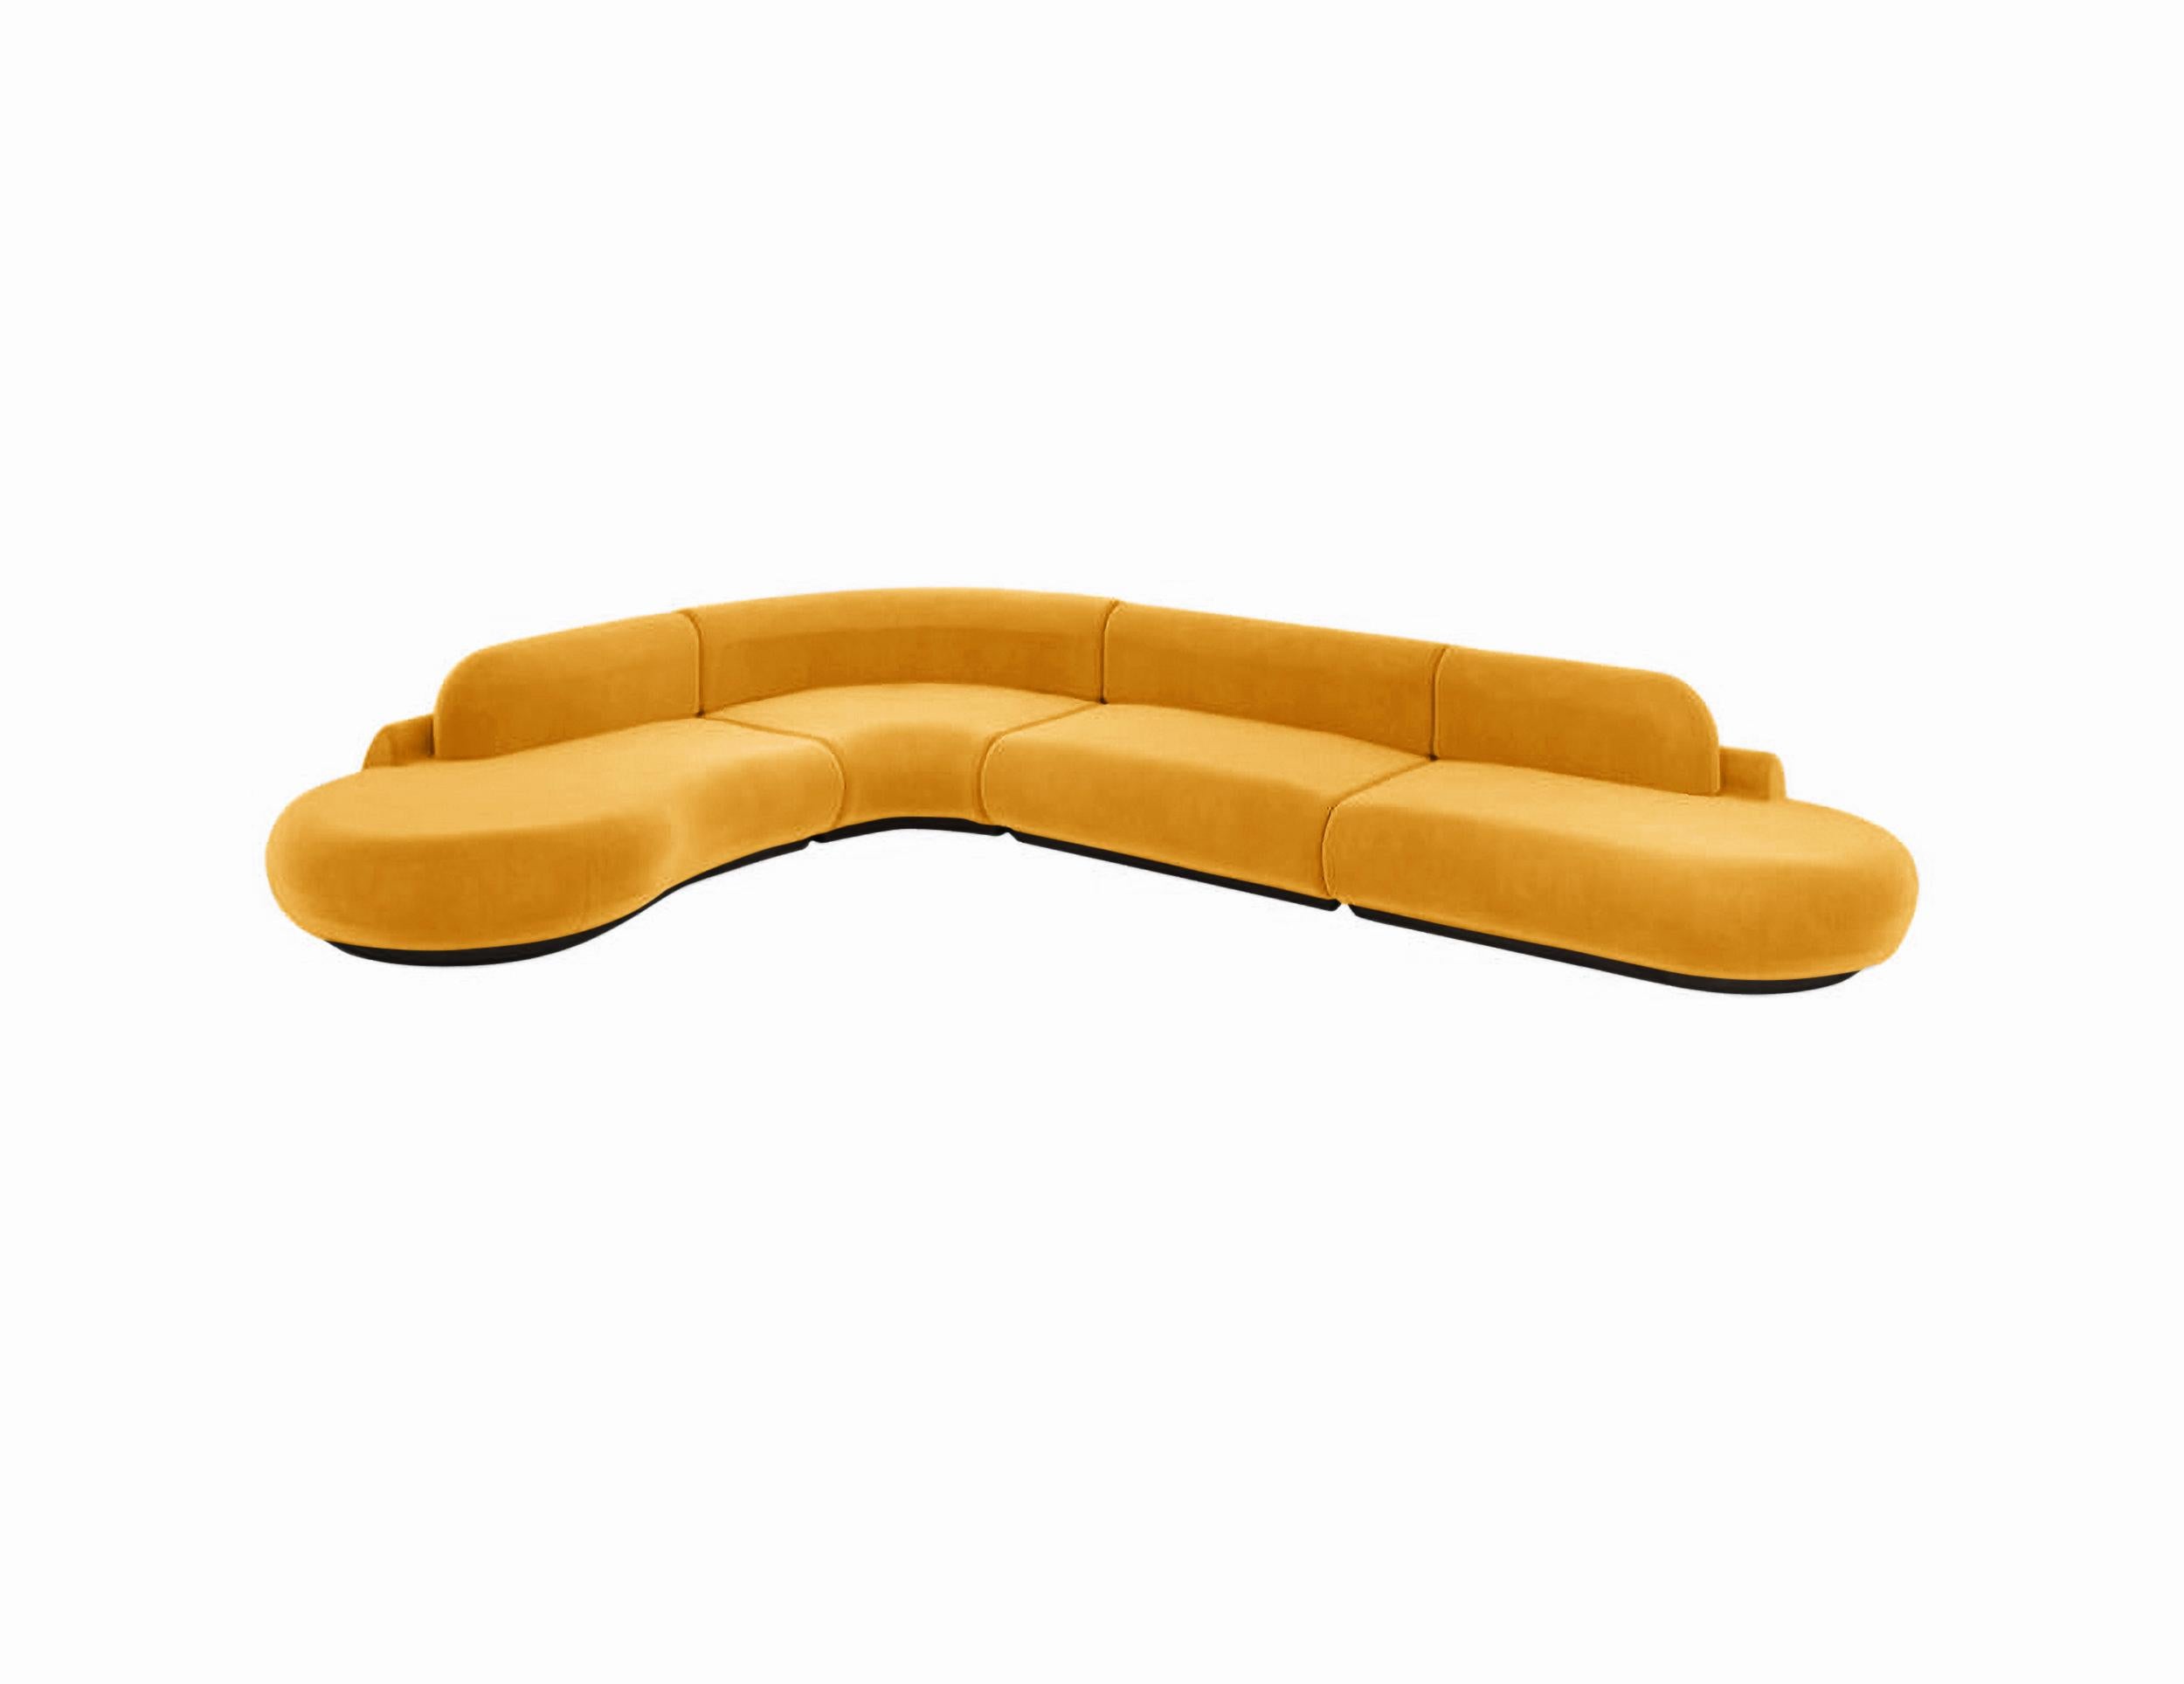 Naked Curved Sectional Sofa, 4 Piece with Beech Ash-056-5 and Corn For Sale